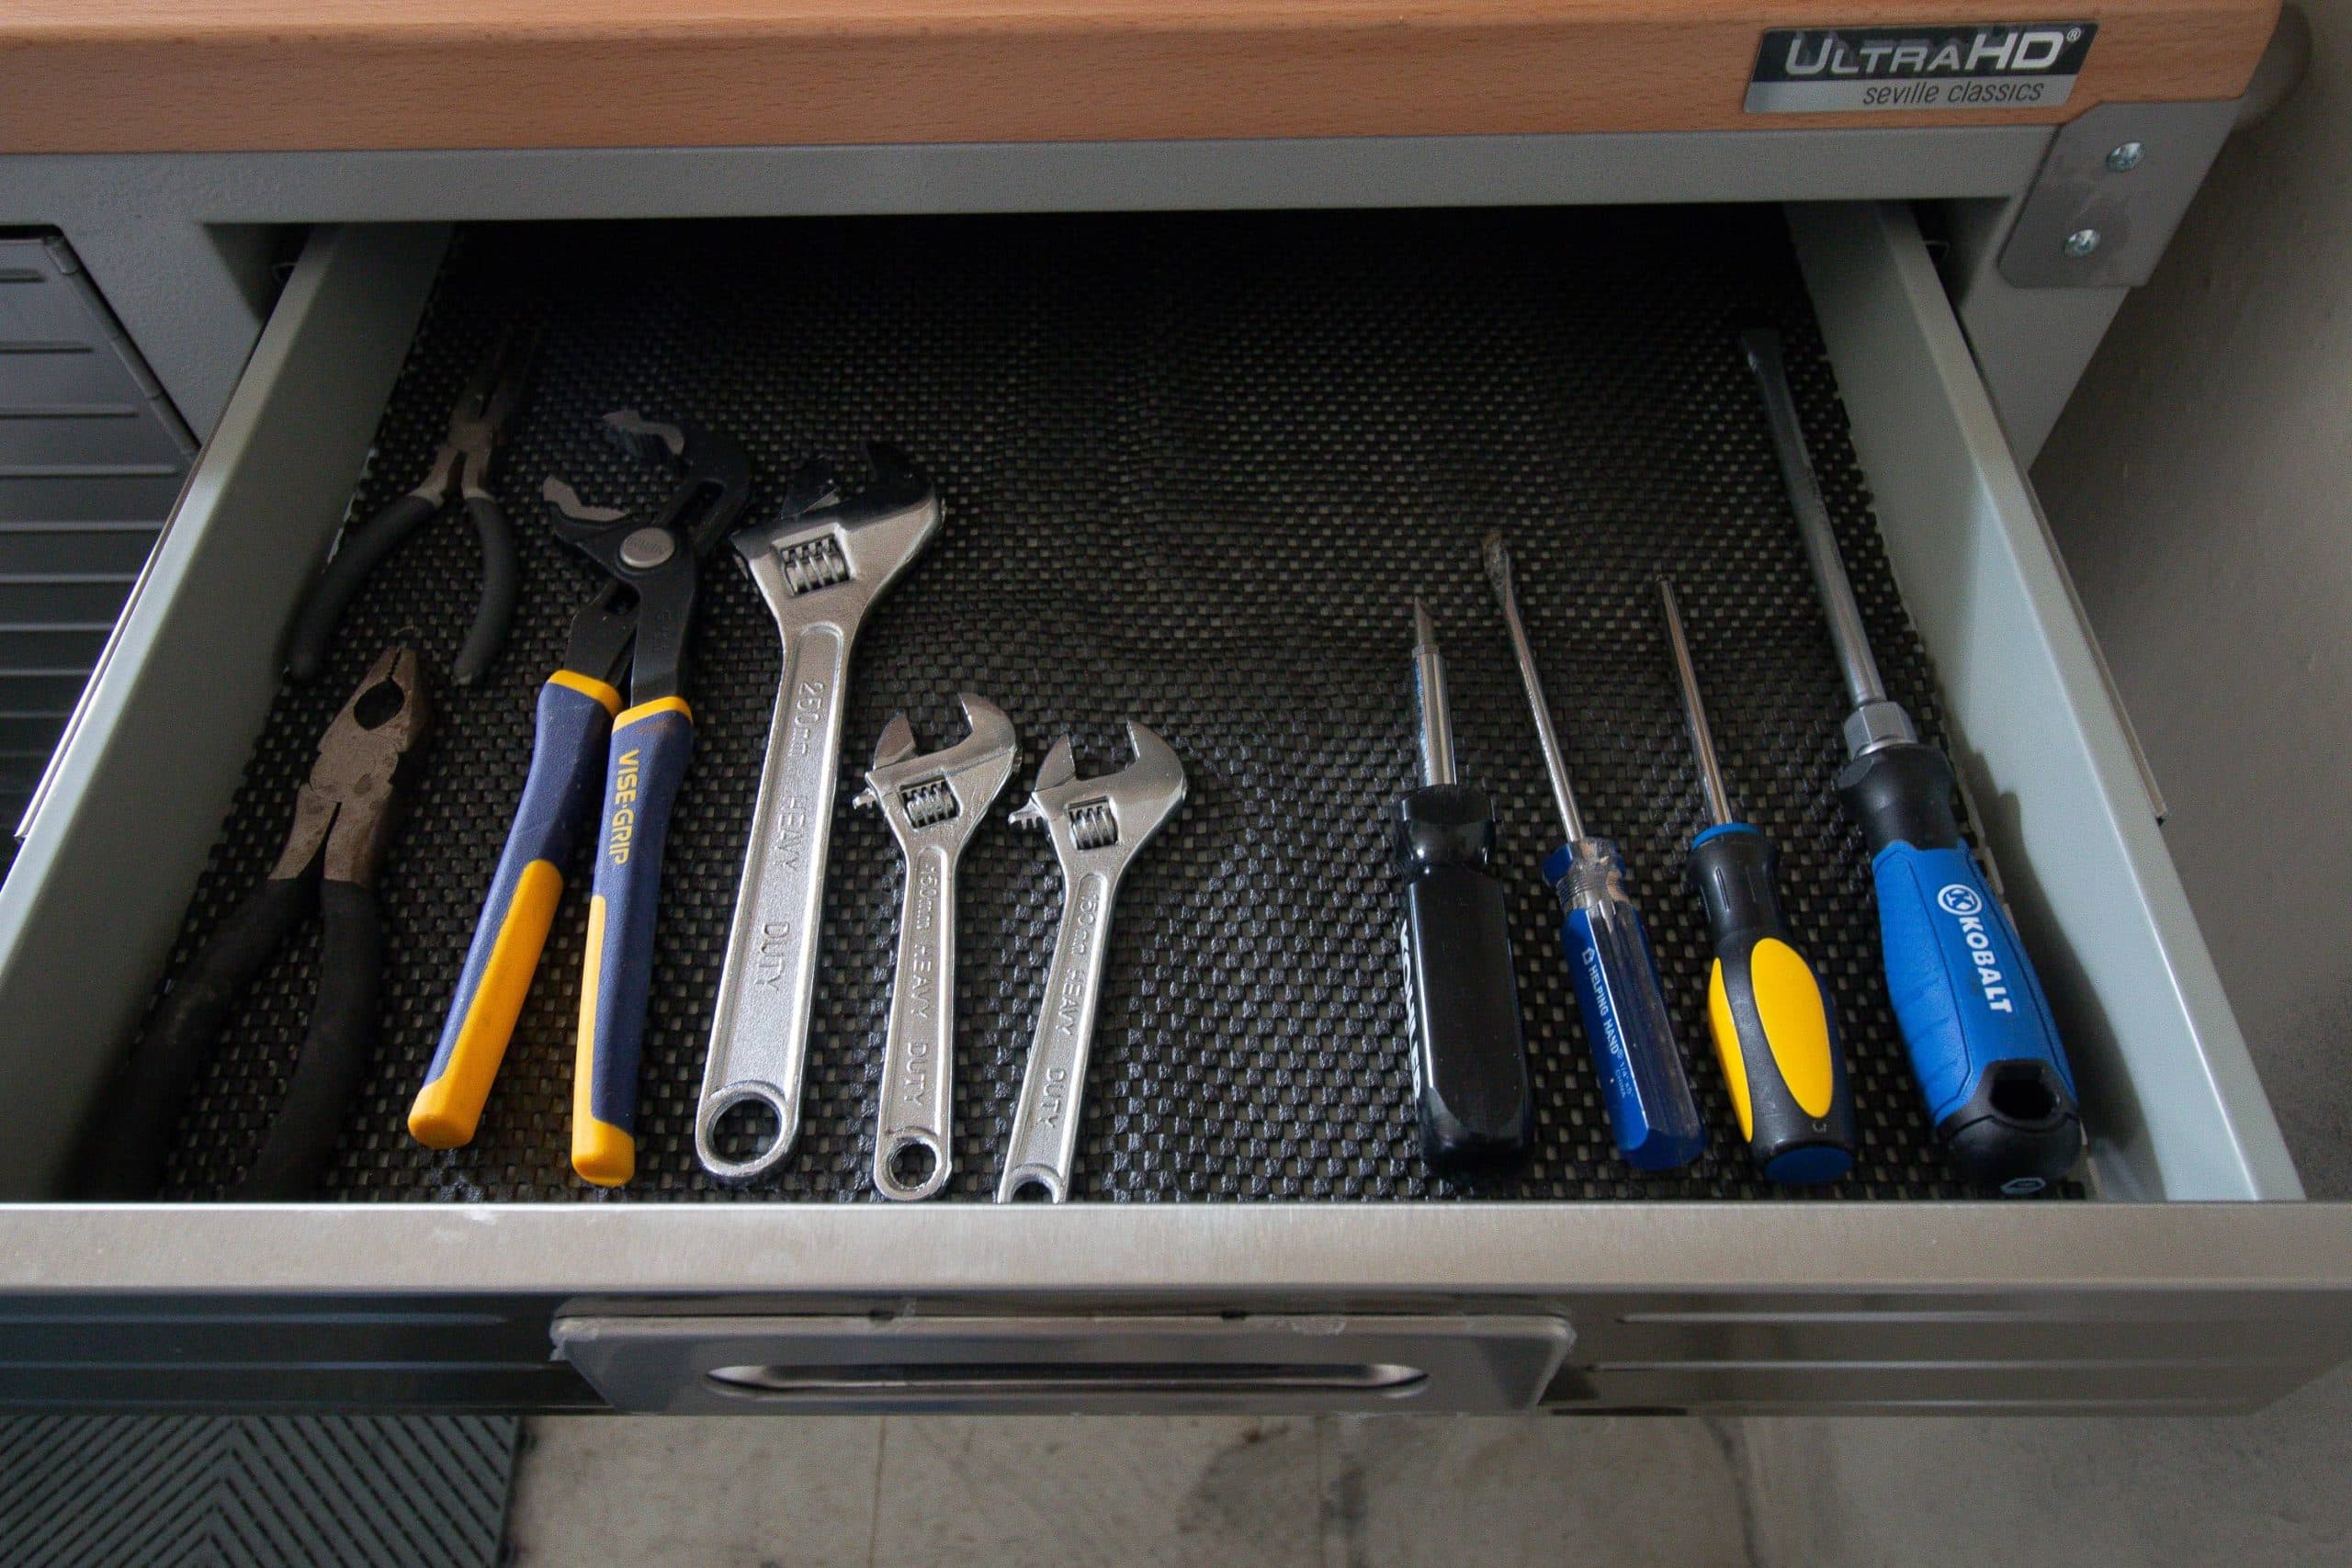 Tips for organized tool storage